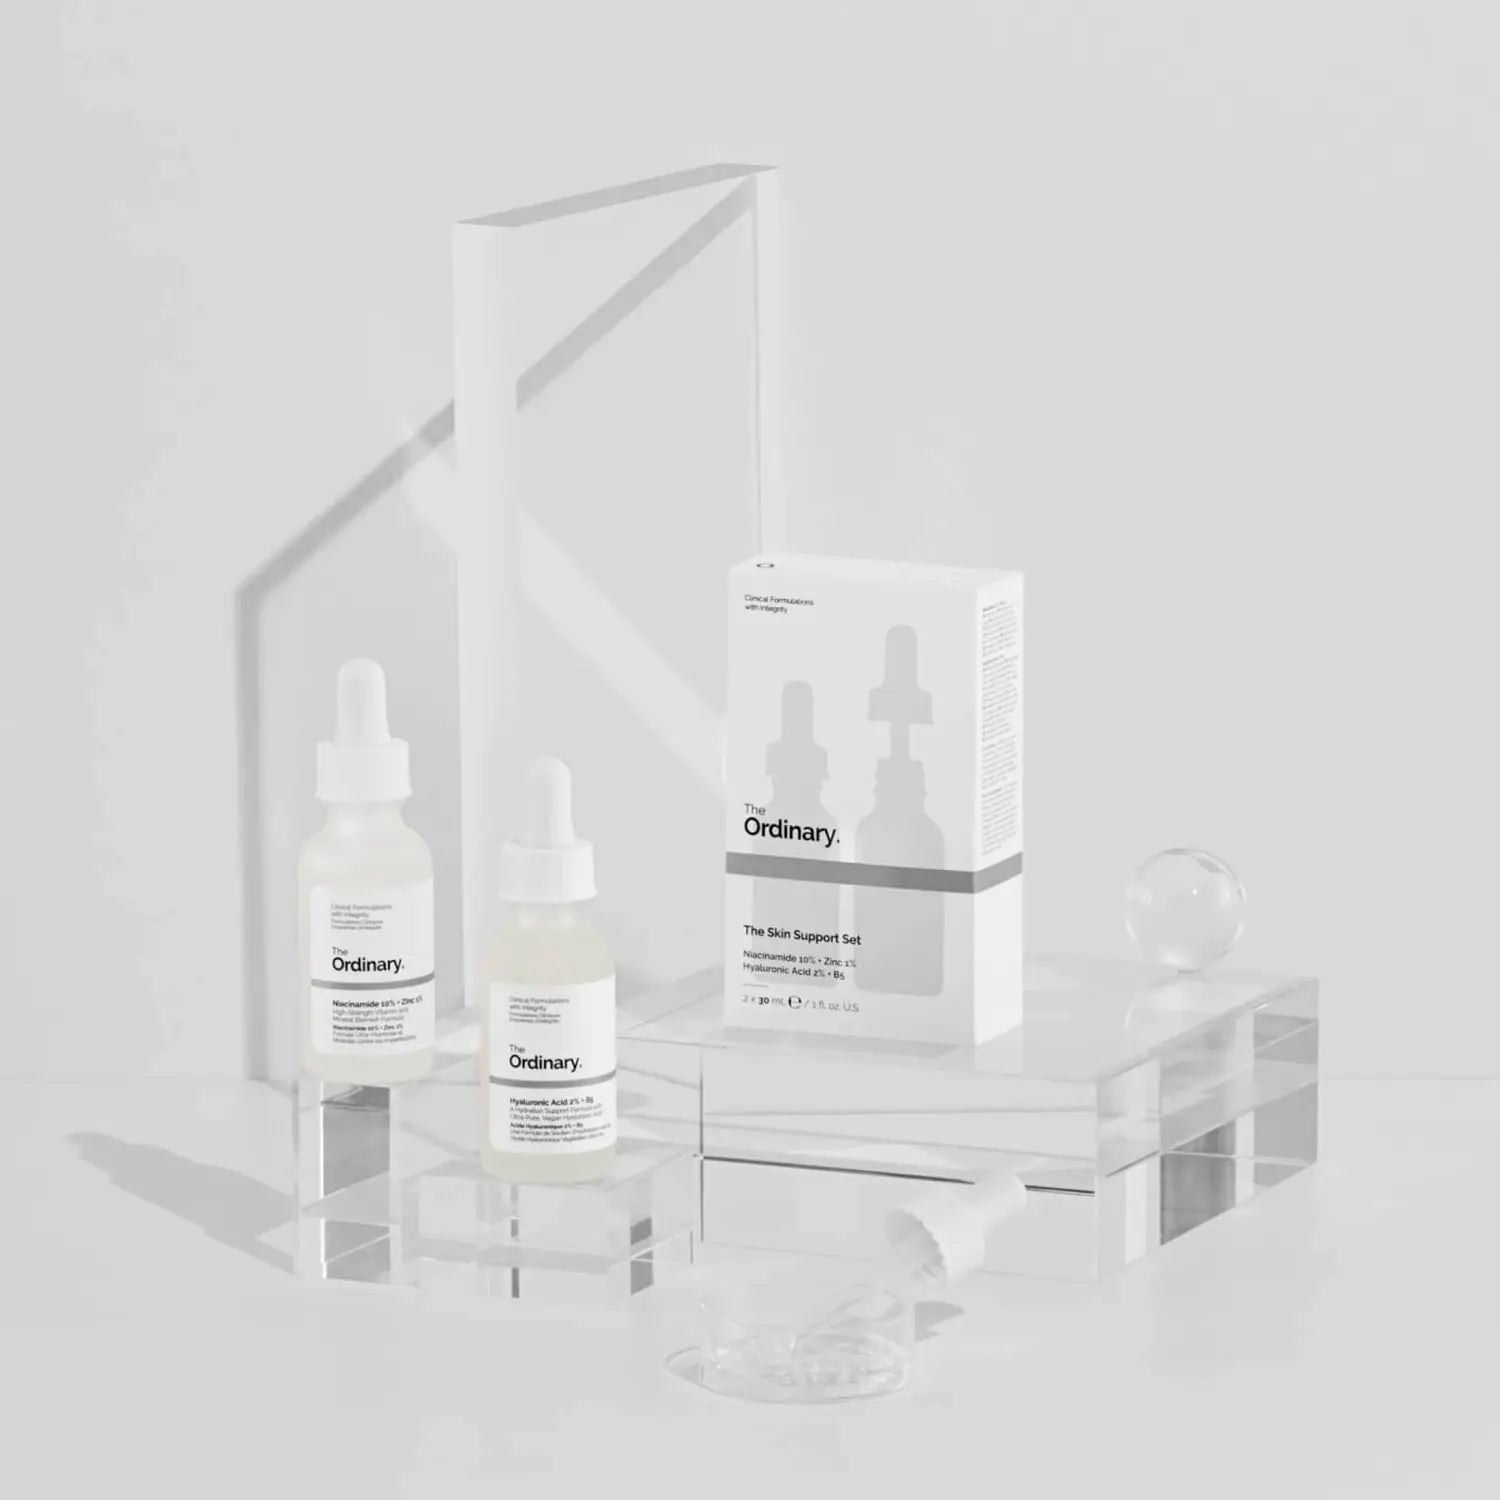 The Skin Support Set The Ordinary